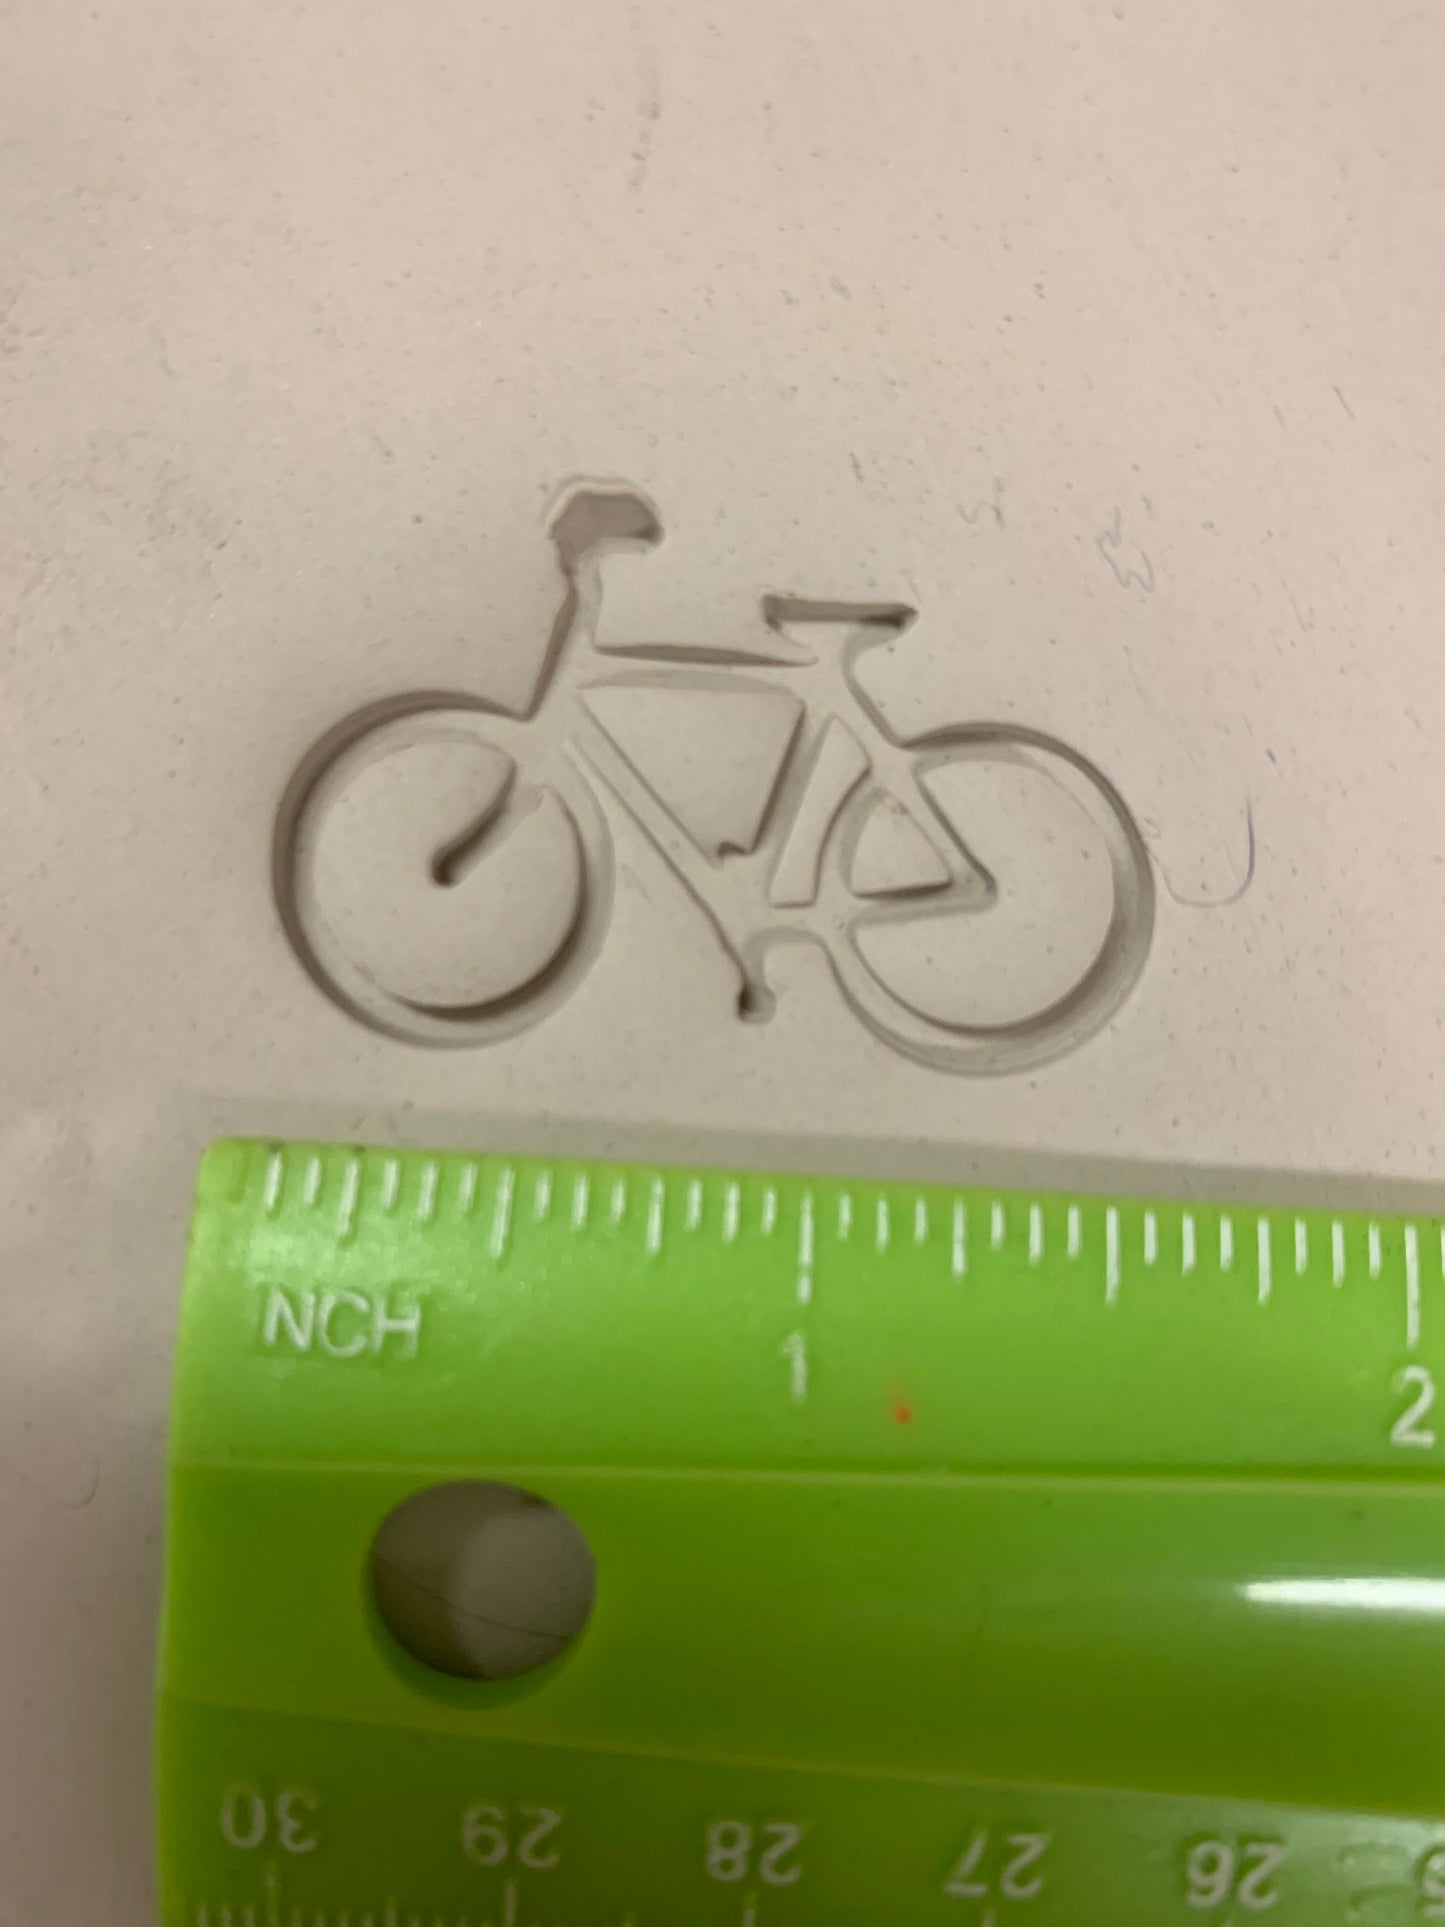 Bike Pottery Stamp - Pottery Tool, plastic 3d printed, multiple sizes available